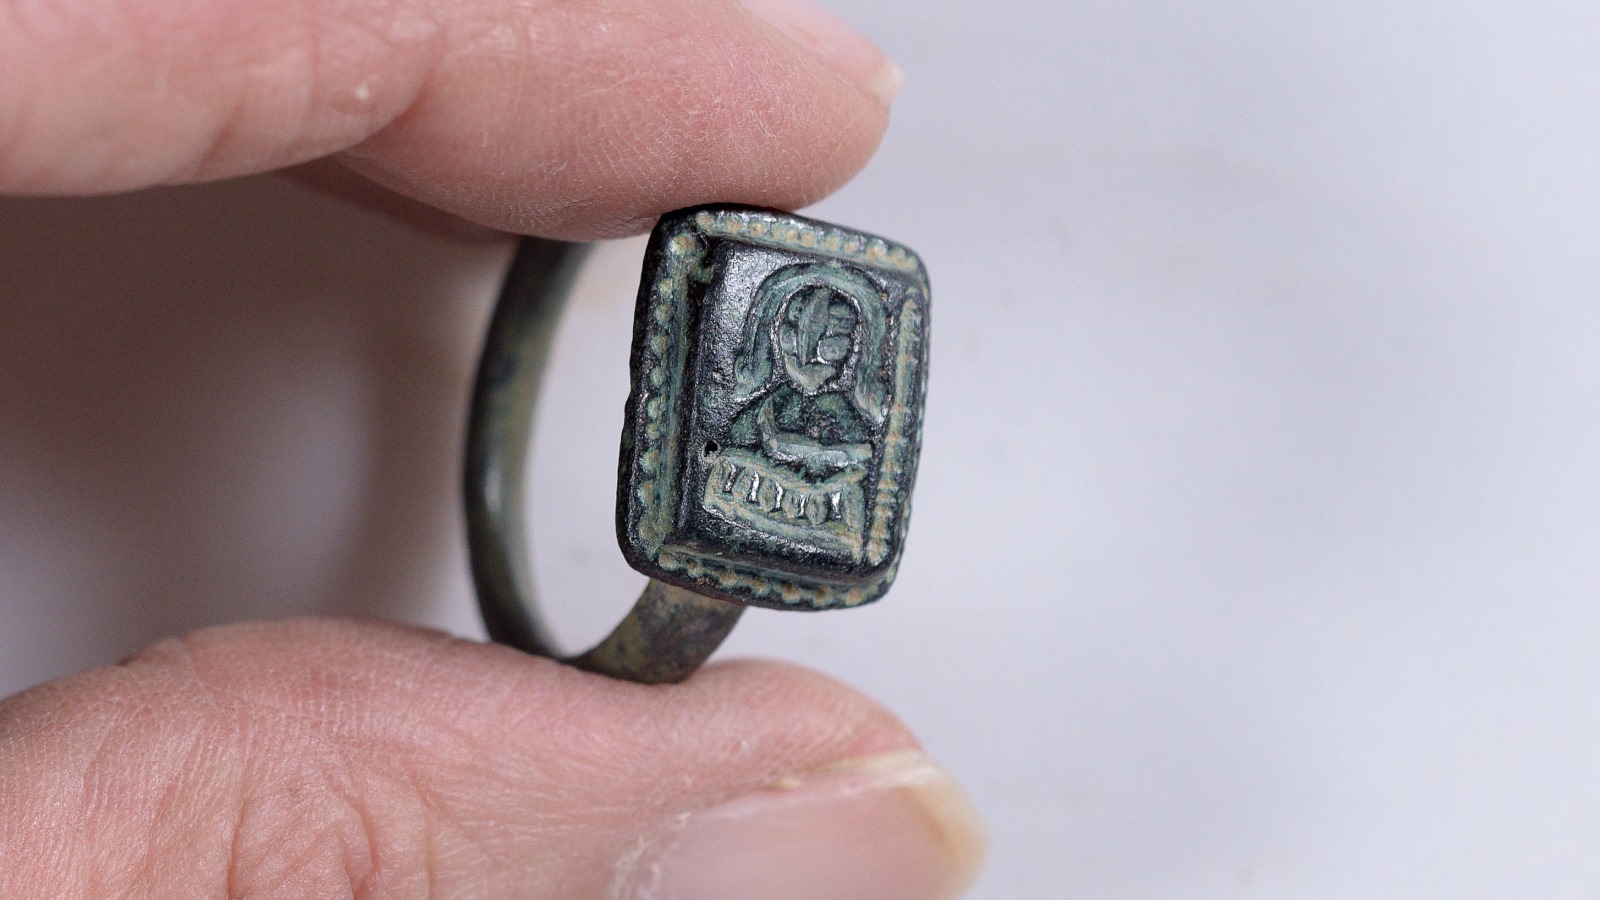 The St. Nicholas ring found in Israel, February 2018. Photo by Clara Amit/Israel Antiquities Authority